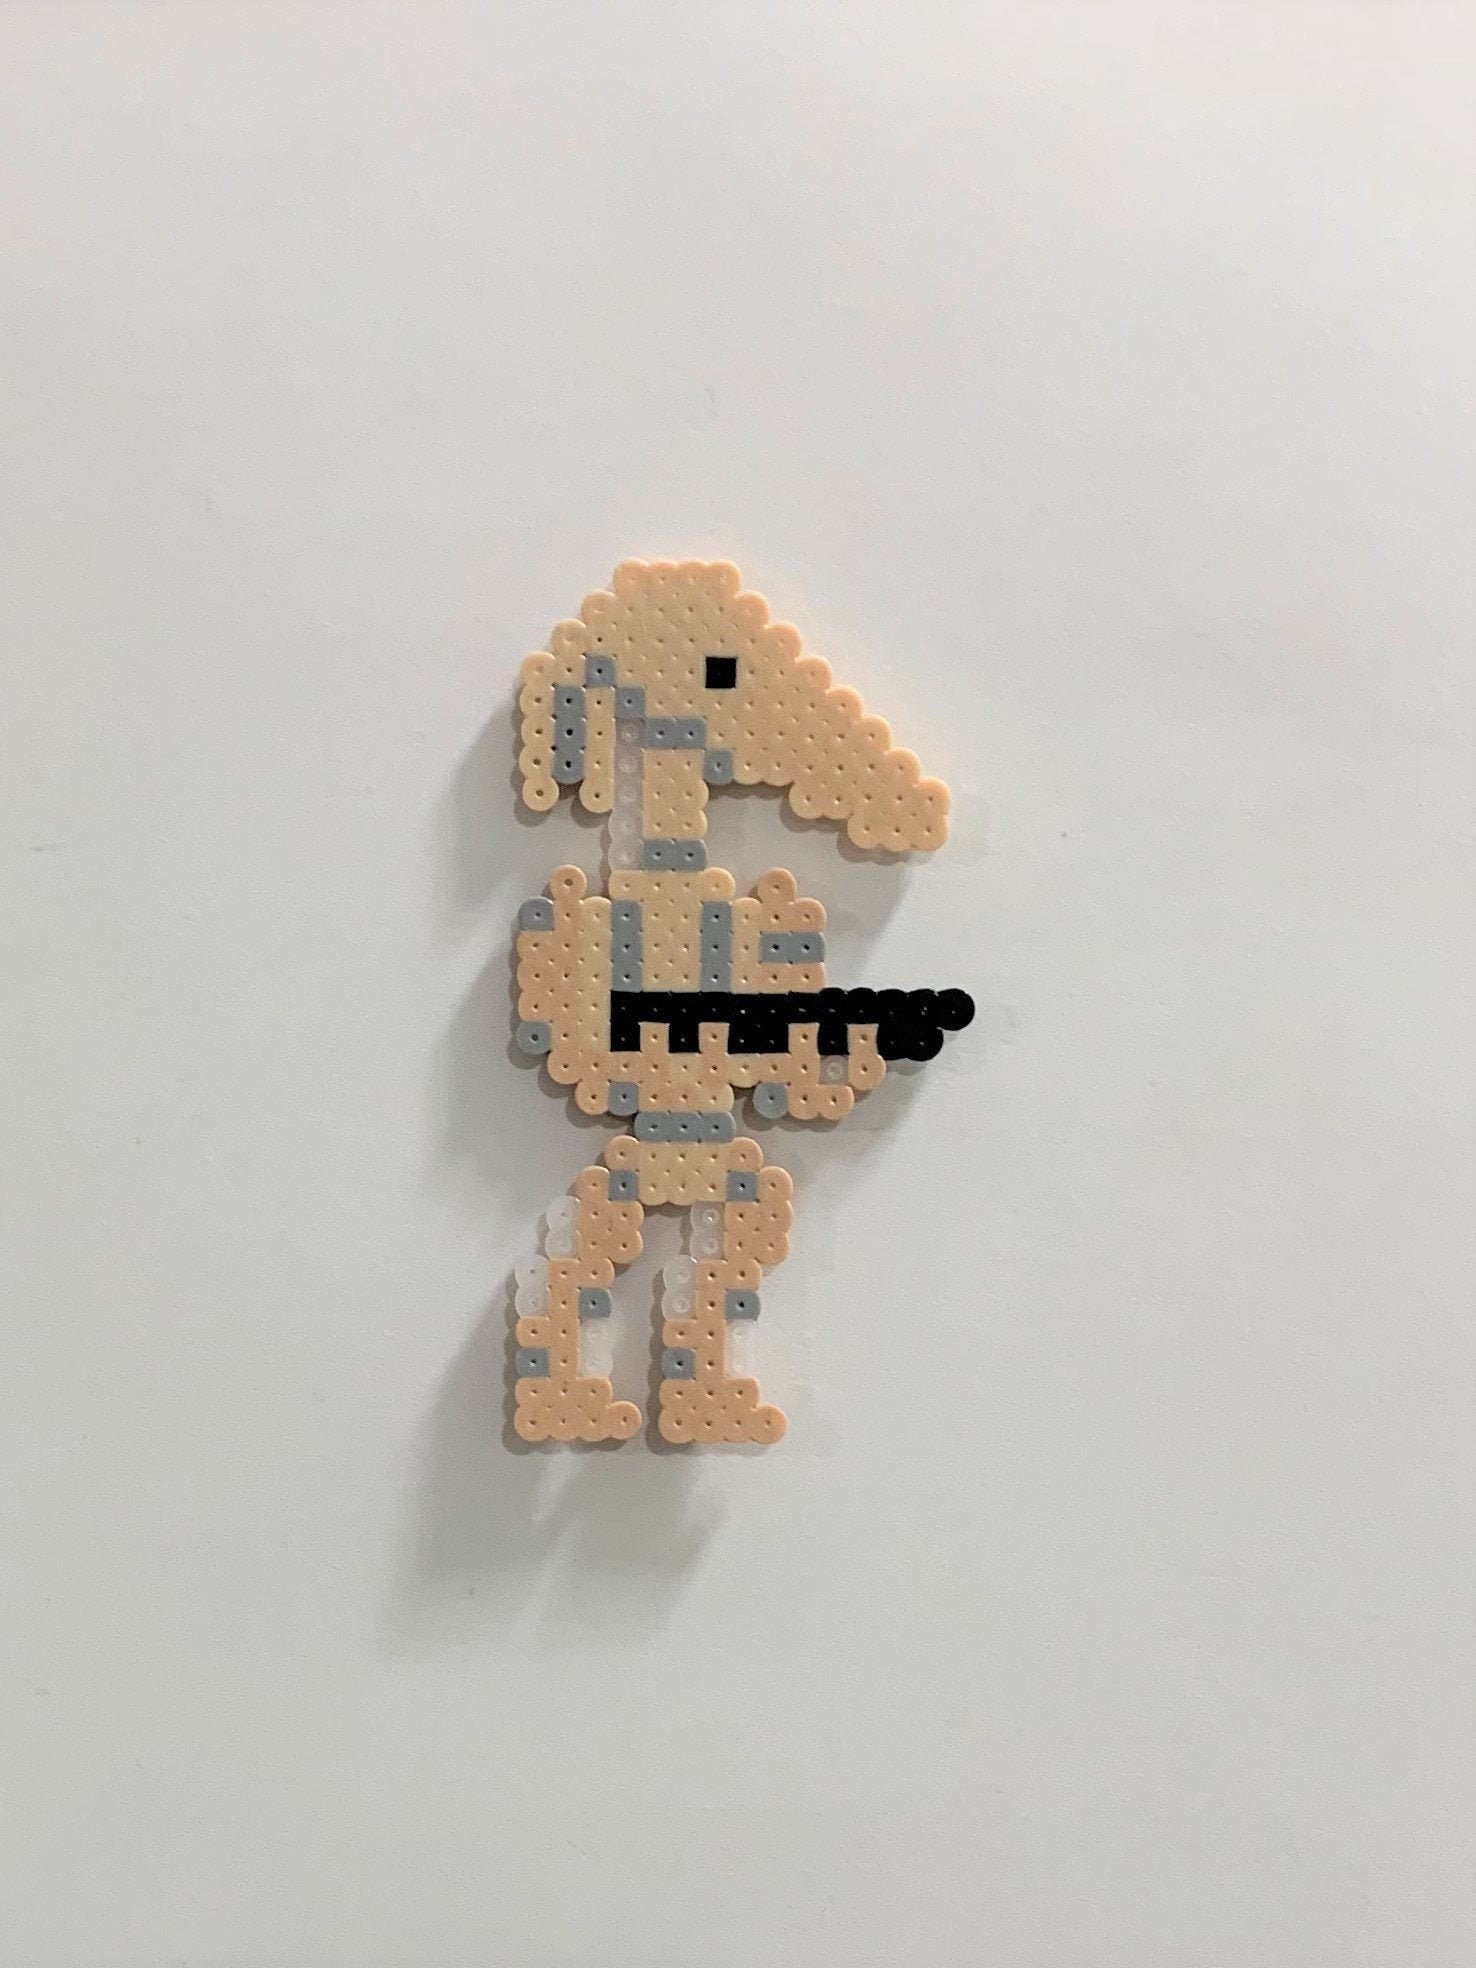 Worst perler product? For me it's the pen : r/PerlerBeads